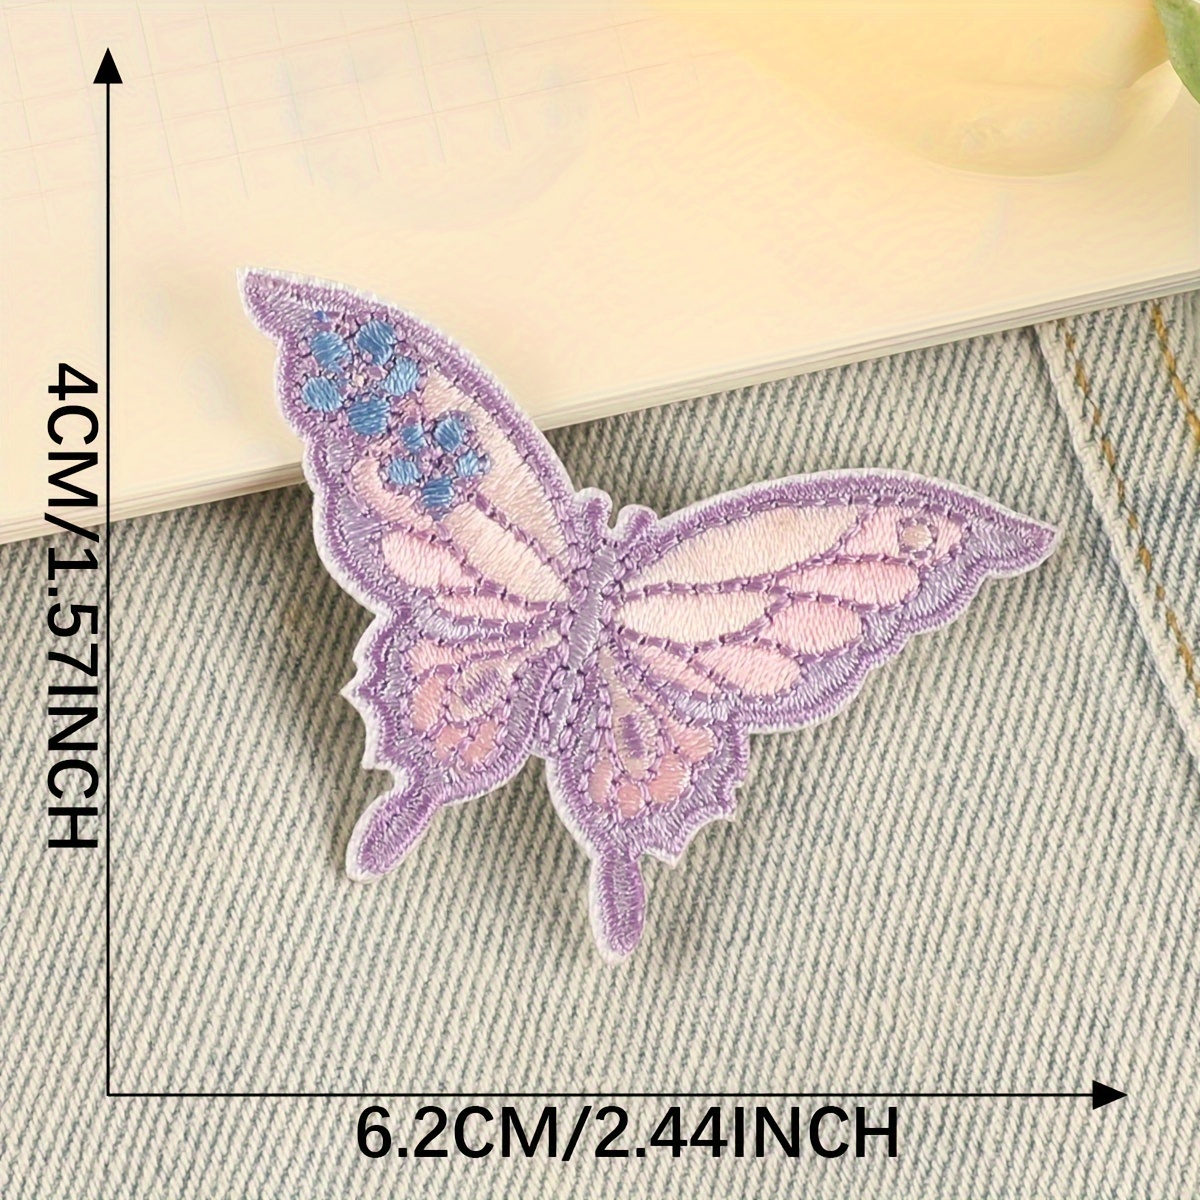 5PCS Cute self-adhesive cartoon embroidered fabric stickers DIY